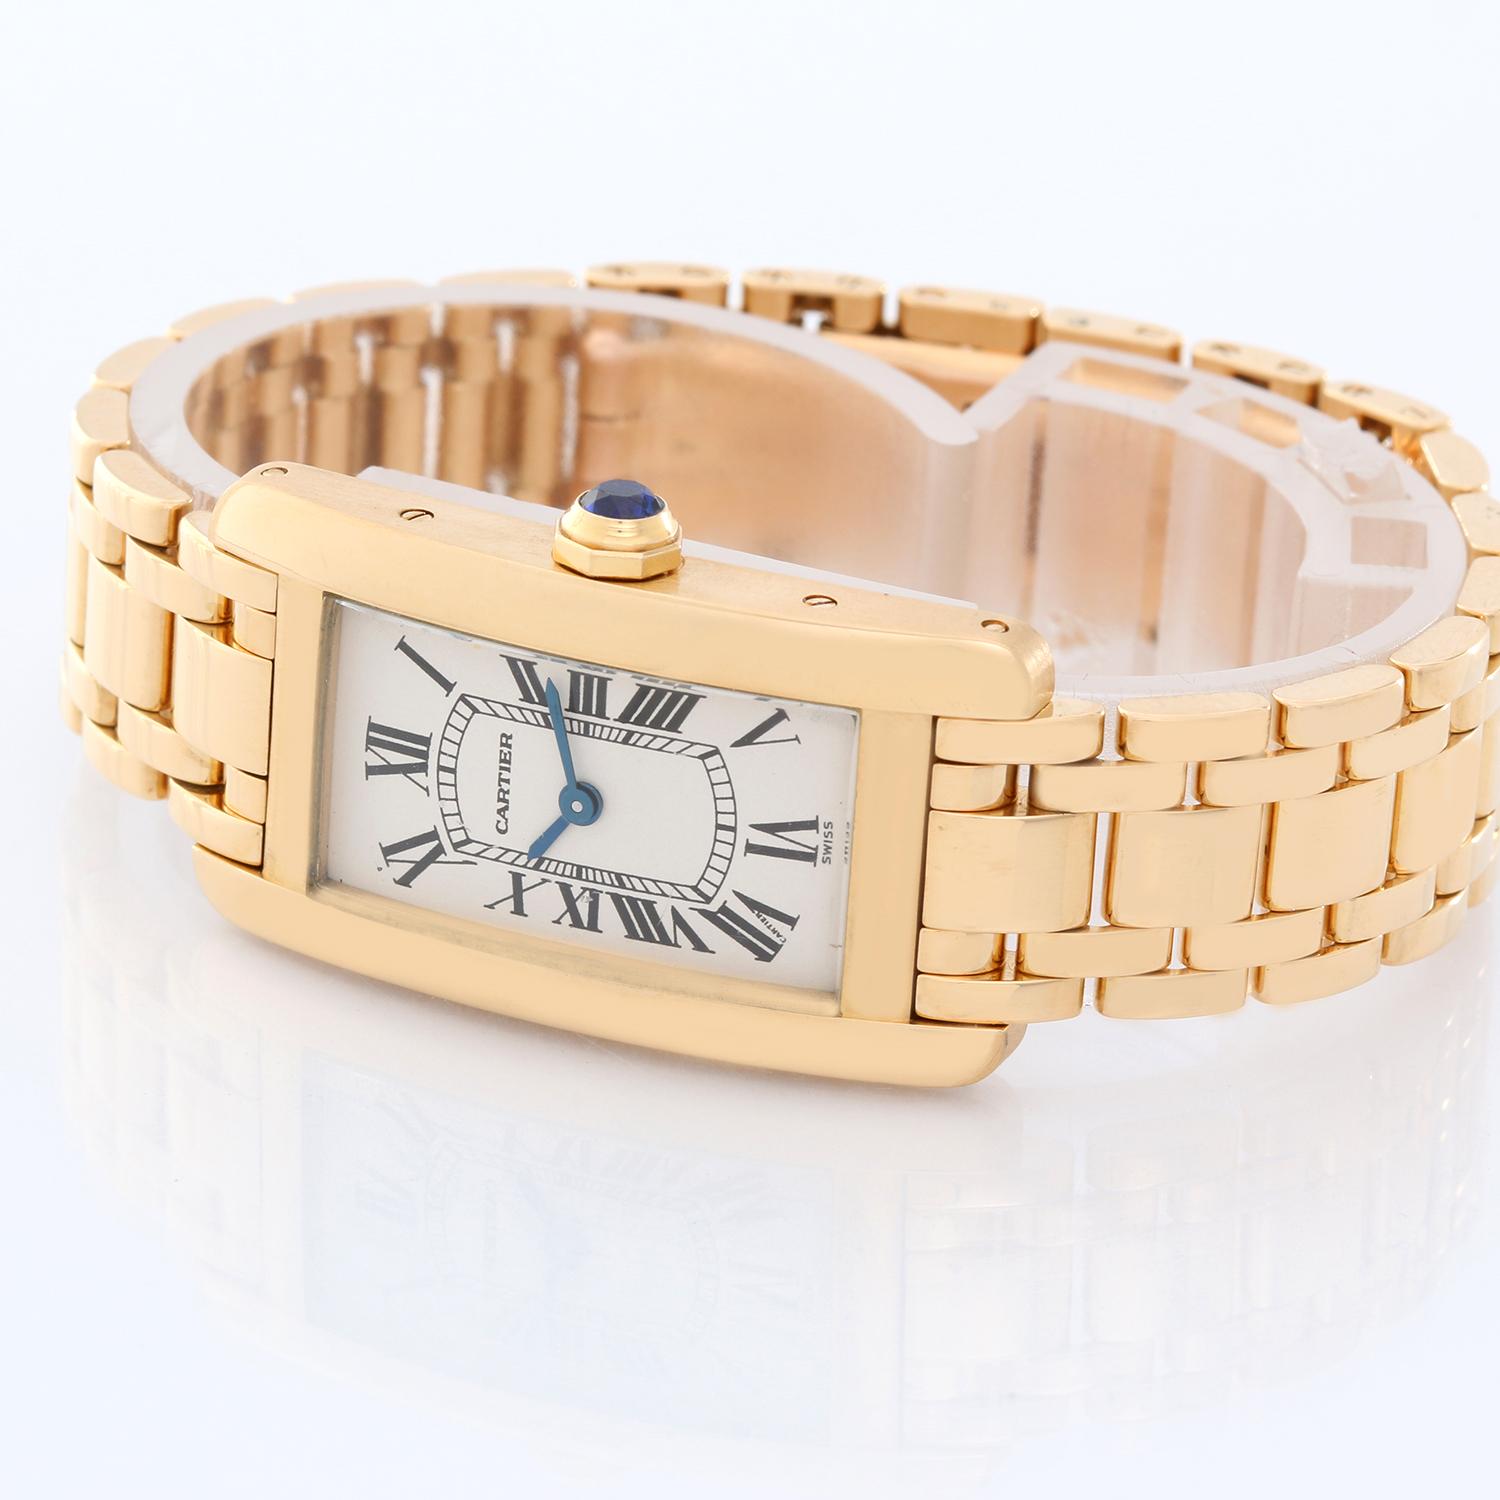 Cartier Tank Americaine Ladies 18k Yellow Gold Watch -  Quartz. 18k yellow gold case (19mm x 35mm). Ivory colored dial with black Roman numerals. 18K yellow gold Cartier bracelet.  Pre-owned with box.